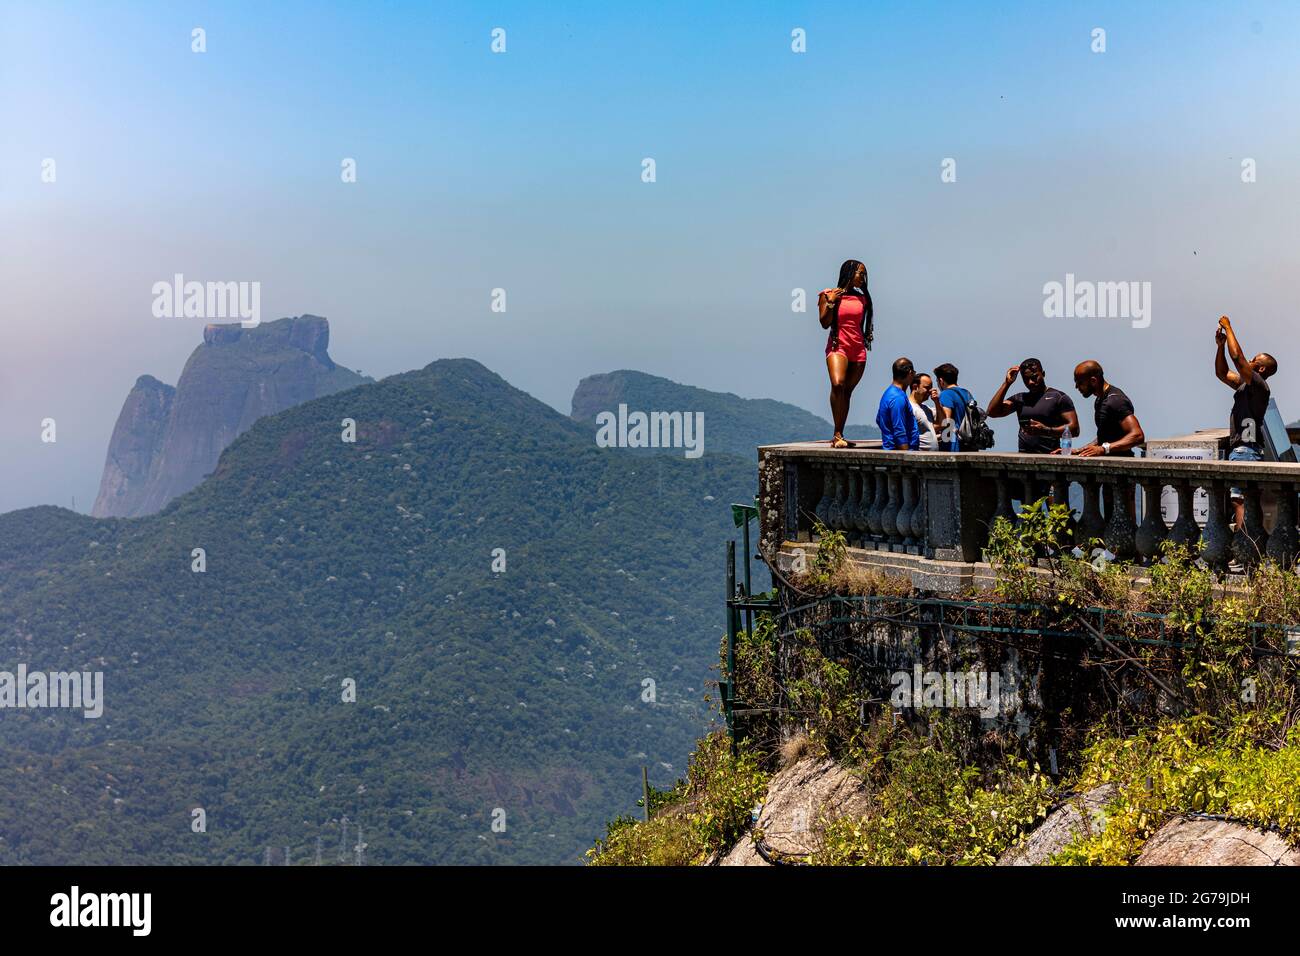 Lots of Tourists taking selfie photos at the Christ the Redeemer statue atop the Corcovado Mountain in Rio de Janeiro, Brazil. Stock Photo